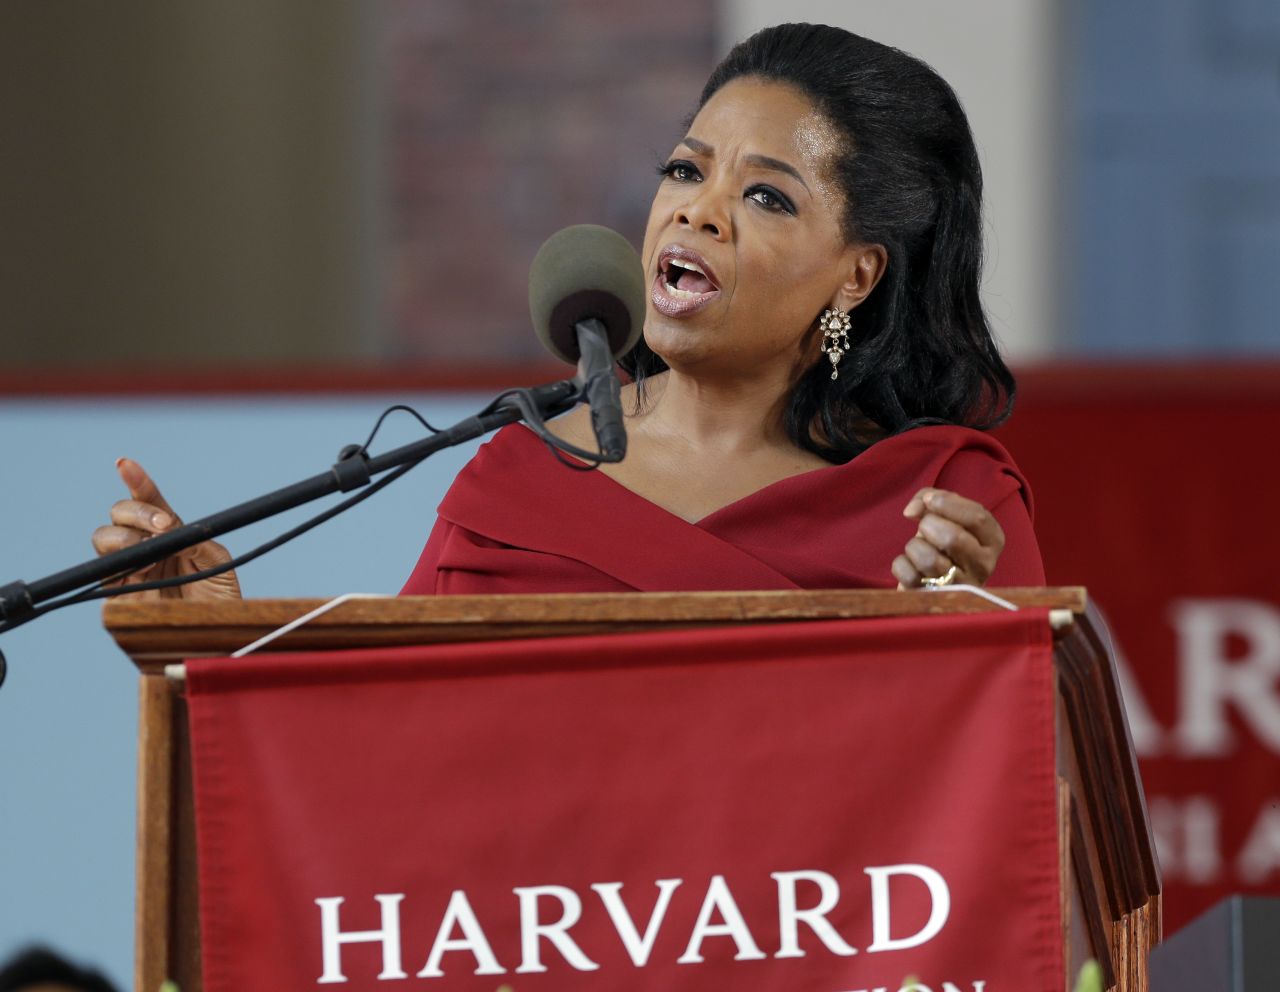 <strong>Talk show host and television producer Oprah Winfrey, Harvard University, 2013 --</strong> "Failure is just life trying to move us in another direction."